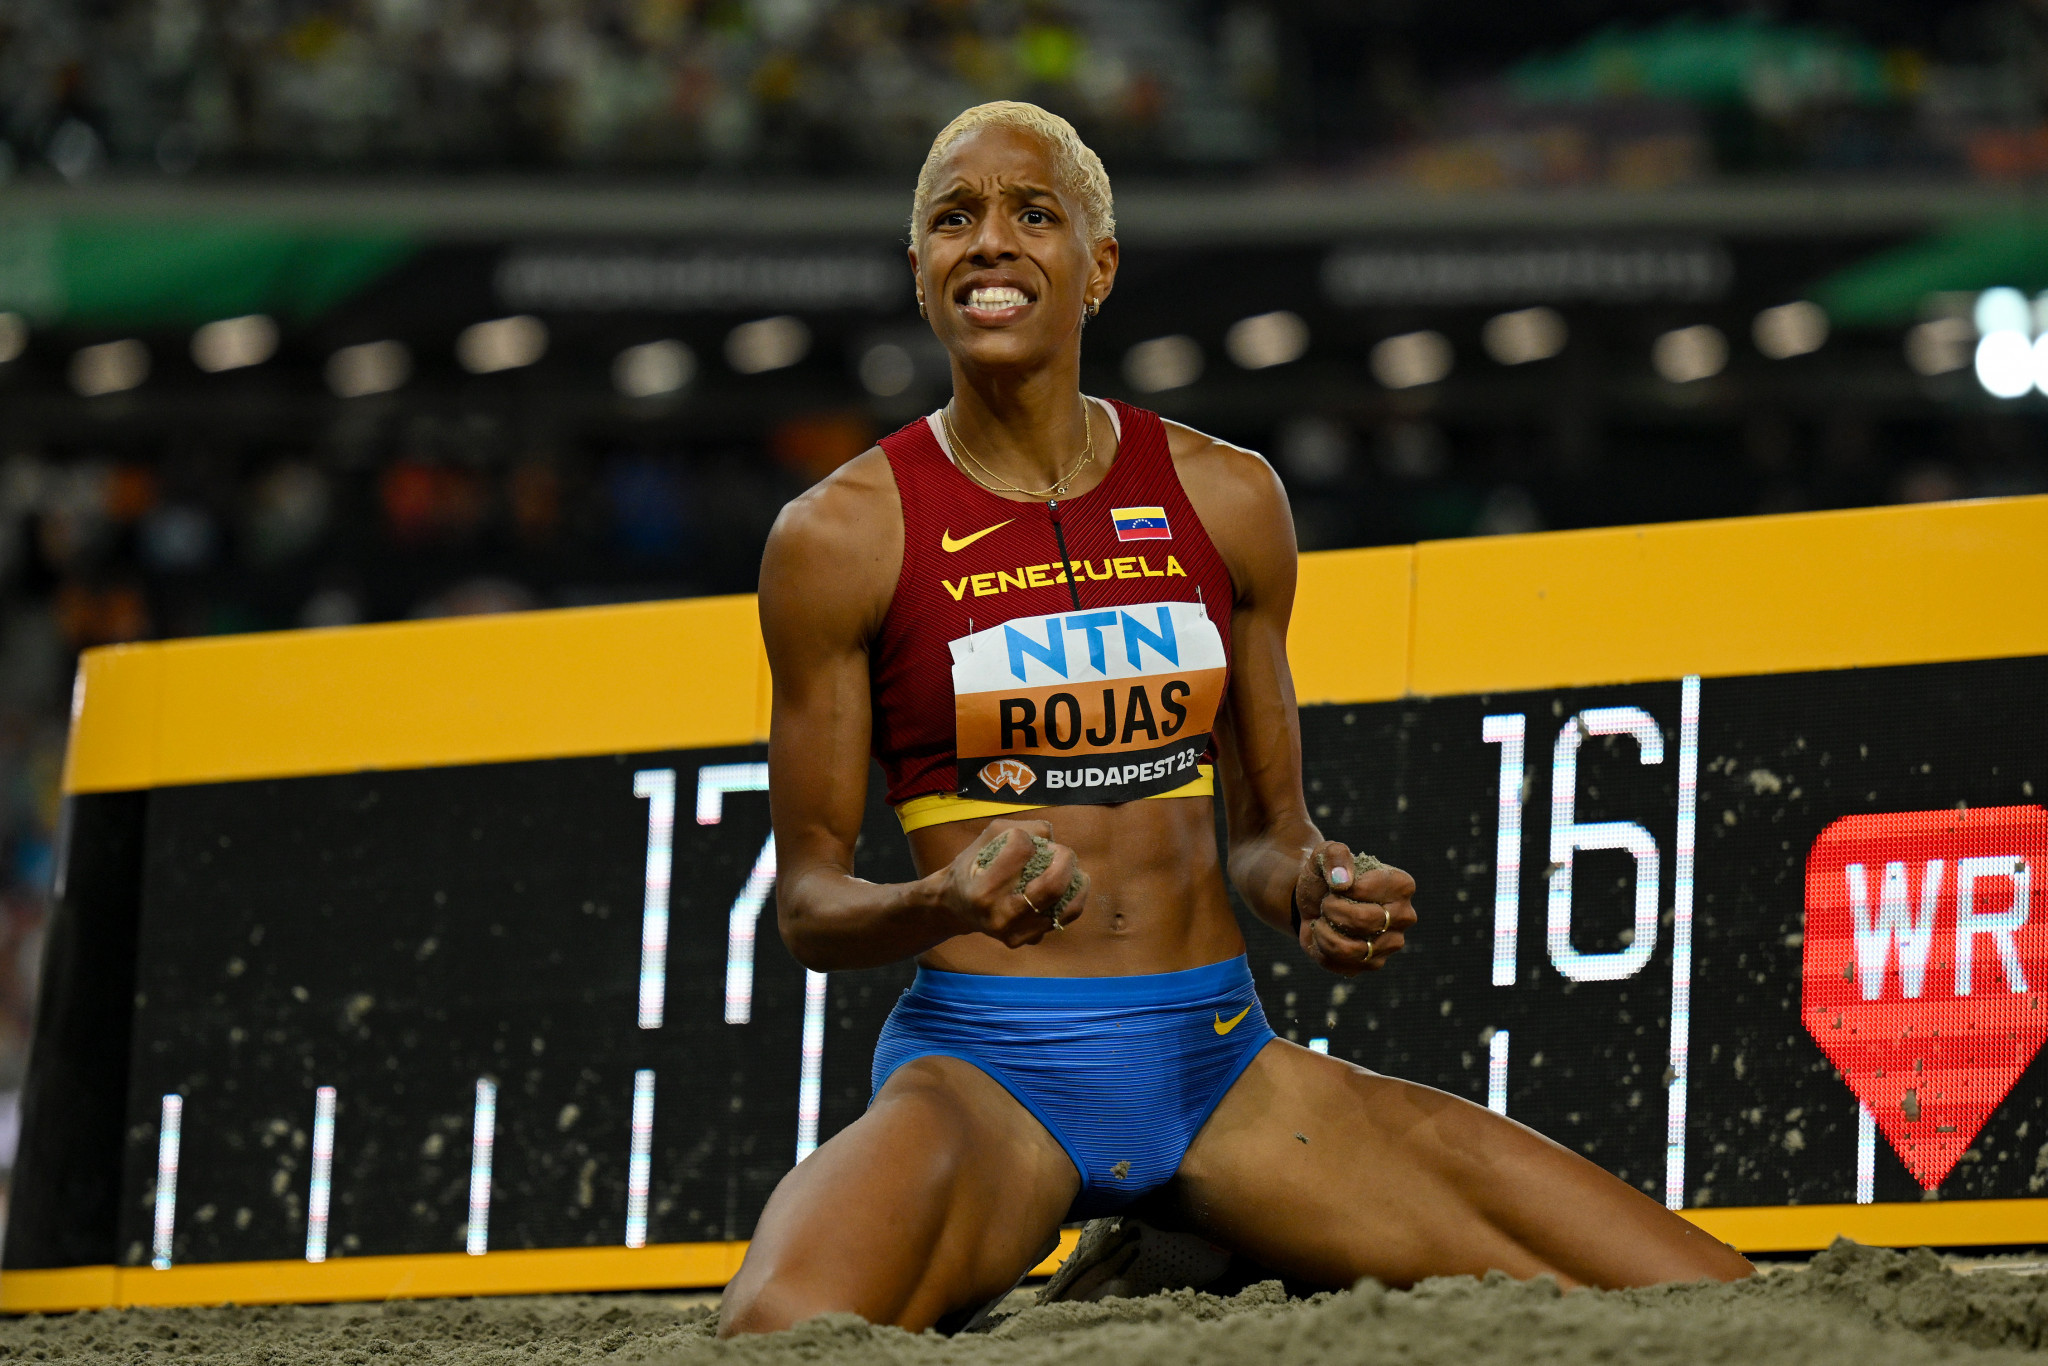 Rojas earns fourth straight triple jump World Championships gold on final attempt